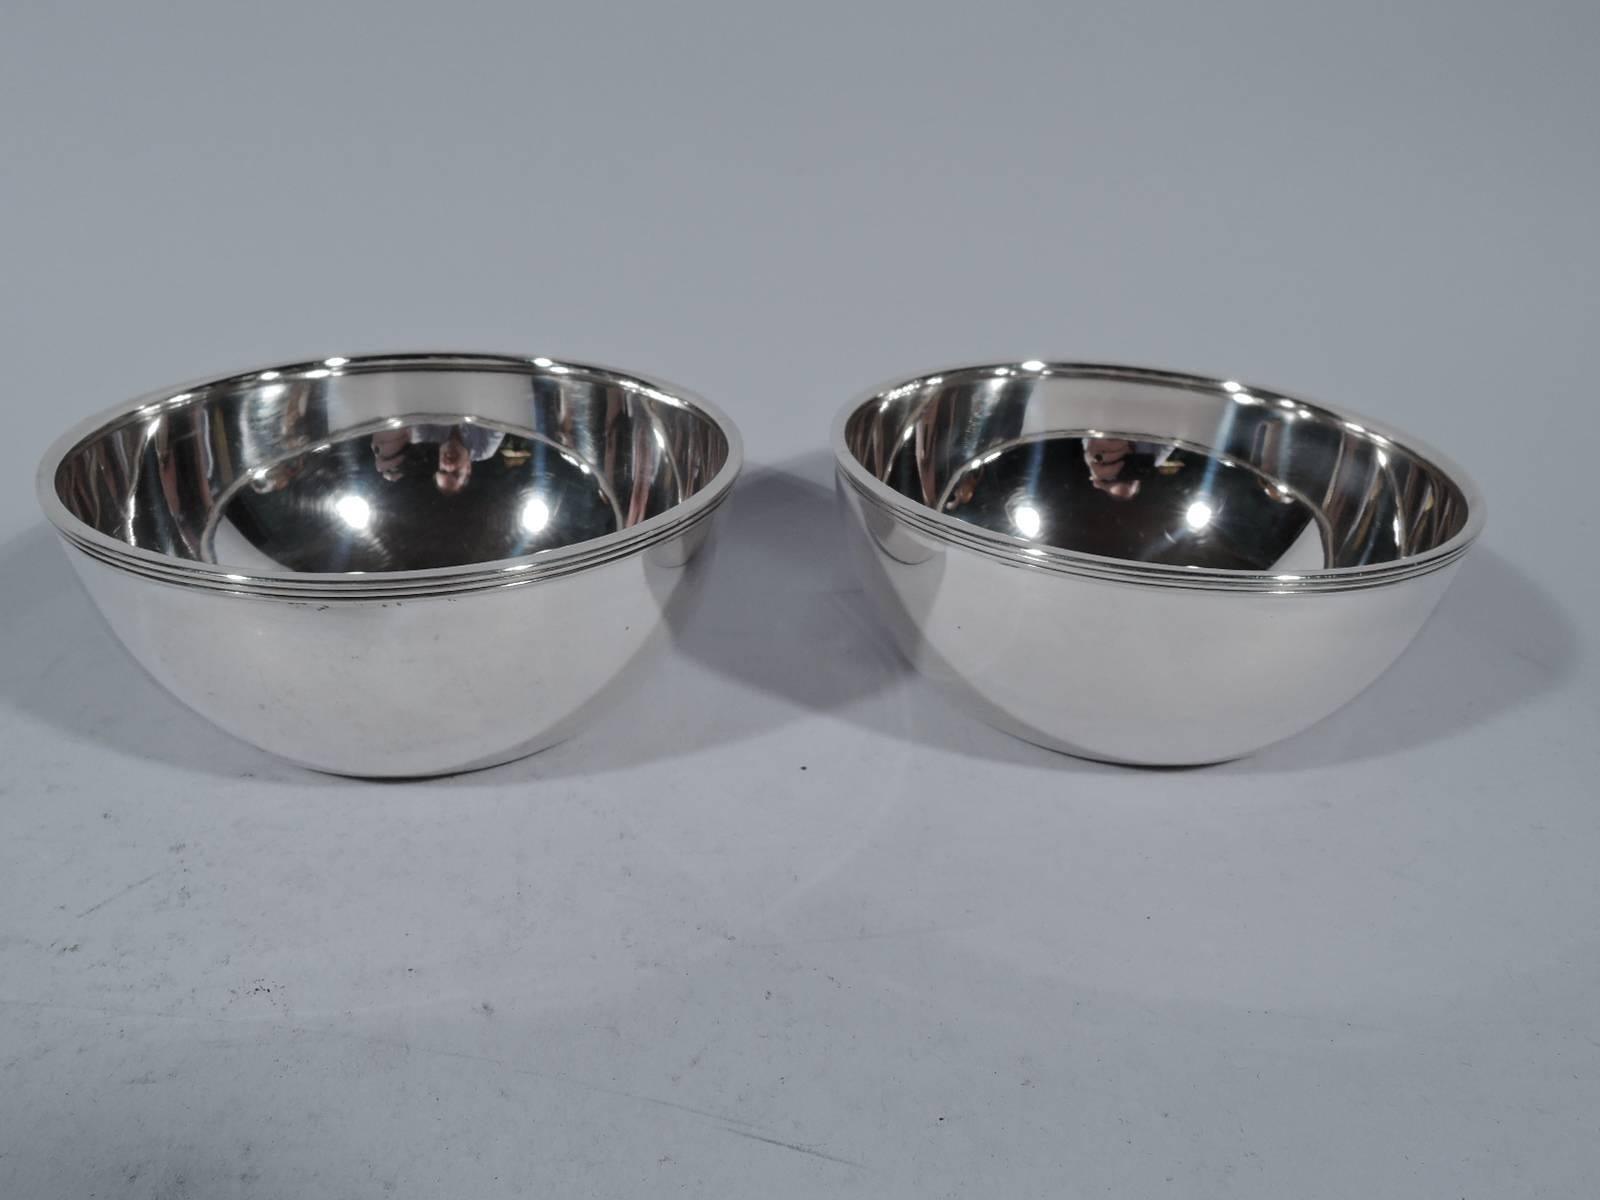 Set of ten sterling silver dessert bowls. Made by Gorham in Providence, circa 1910. Each: Curved sides and reeded rim. Hallmarked with pattern no. A7376 or 7376. Total weight: 26 troy ounces.